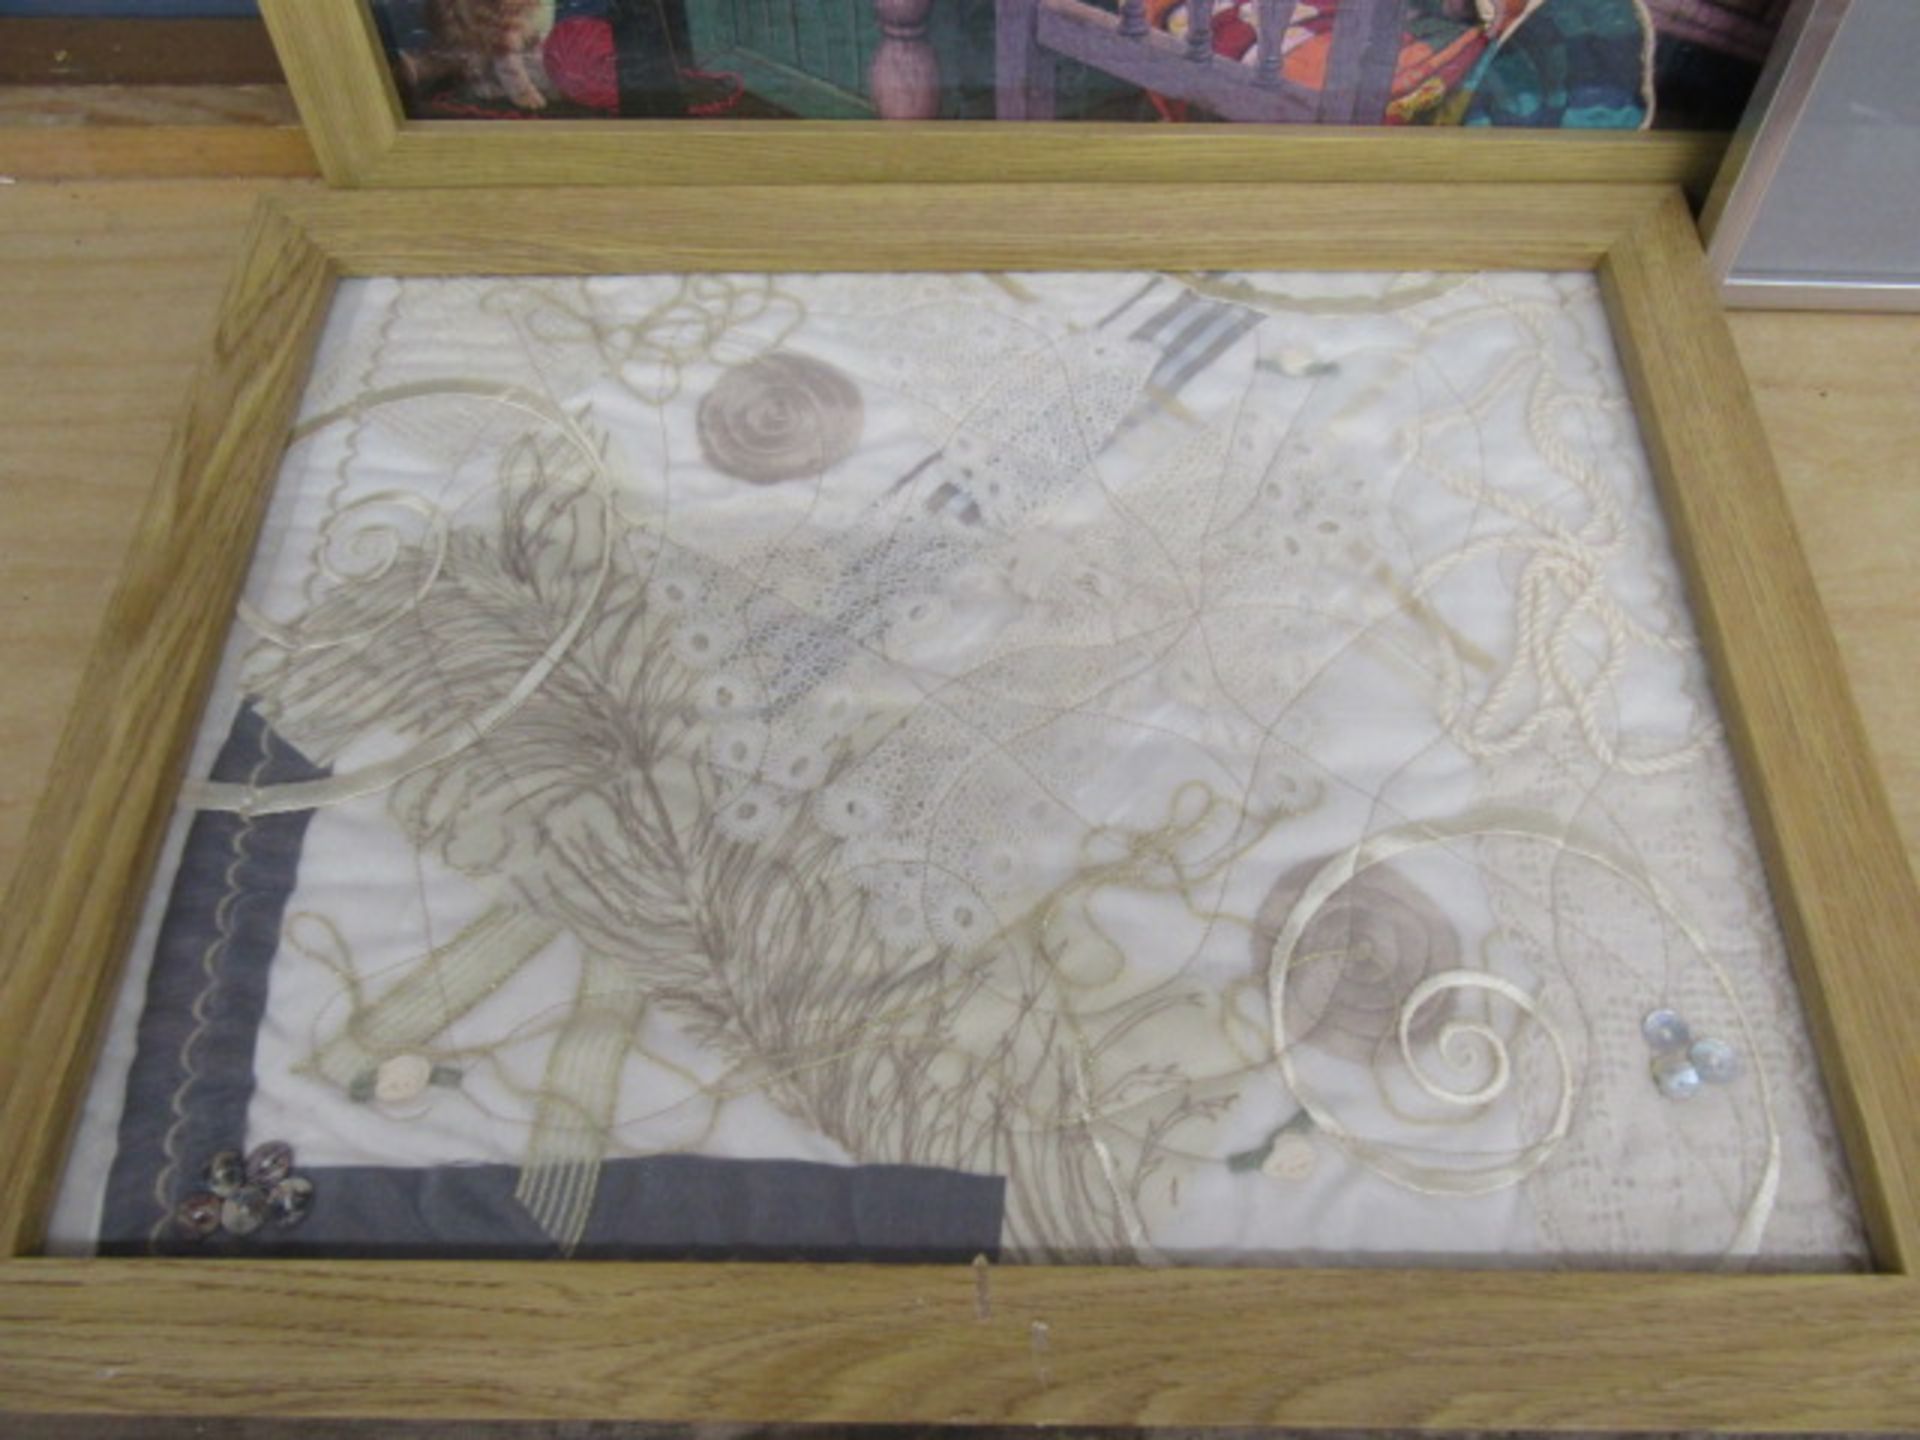 Sewing boxes, one cantilever plus 2 pictures - Image 6 of 9